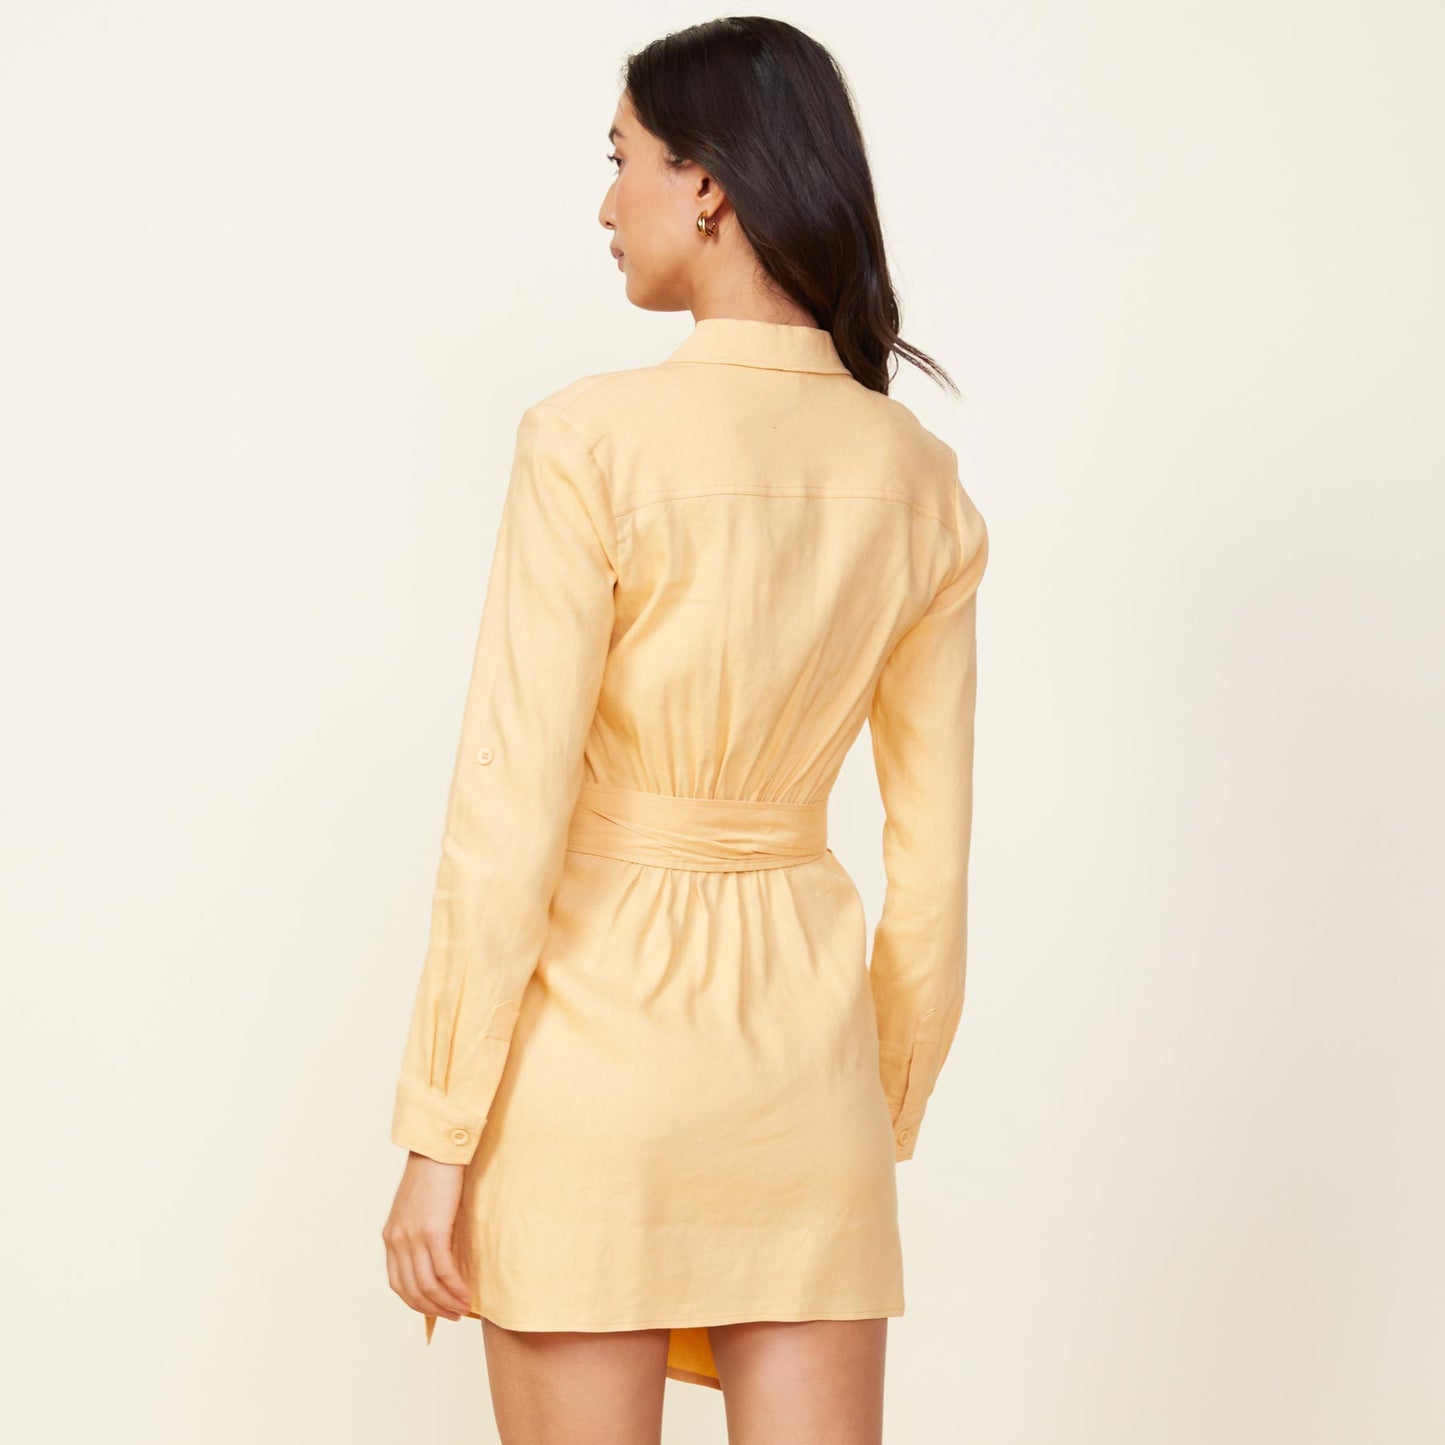 Back view of model wearing the linen mini dress in sand.